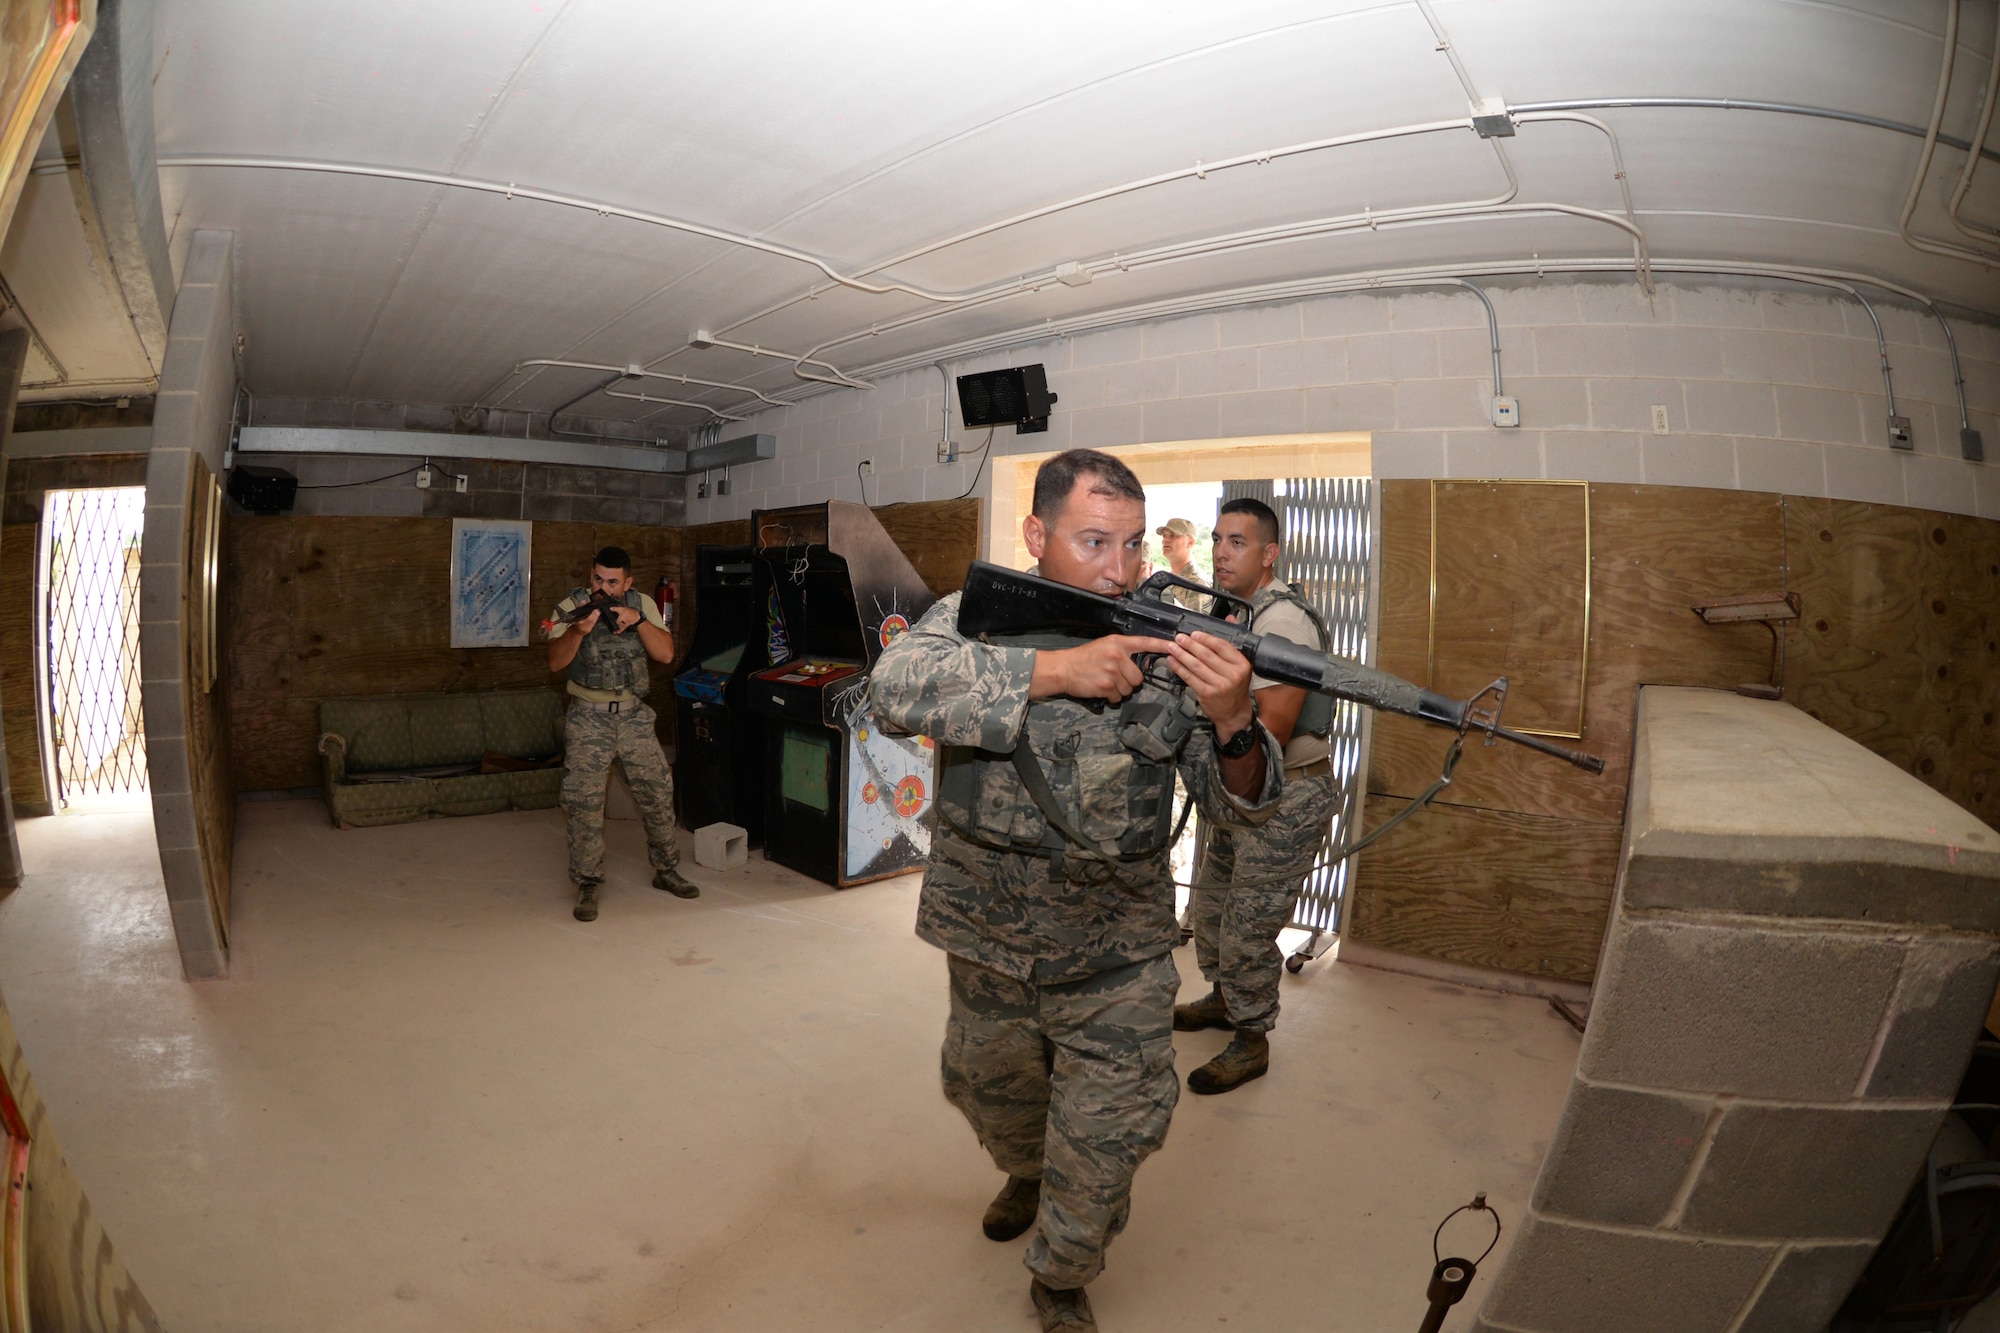 Air Force Reserve Command Defender Challenge Team Members Senior Airman Rick Cardona (left), and Tech Sgts. Francisco Gonzalez, and Hector Zamora, team leader, perform room-clearing exercises at Camp Bullis Military Training Reservation, Texas, Sept. 7, 2018.